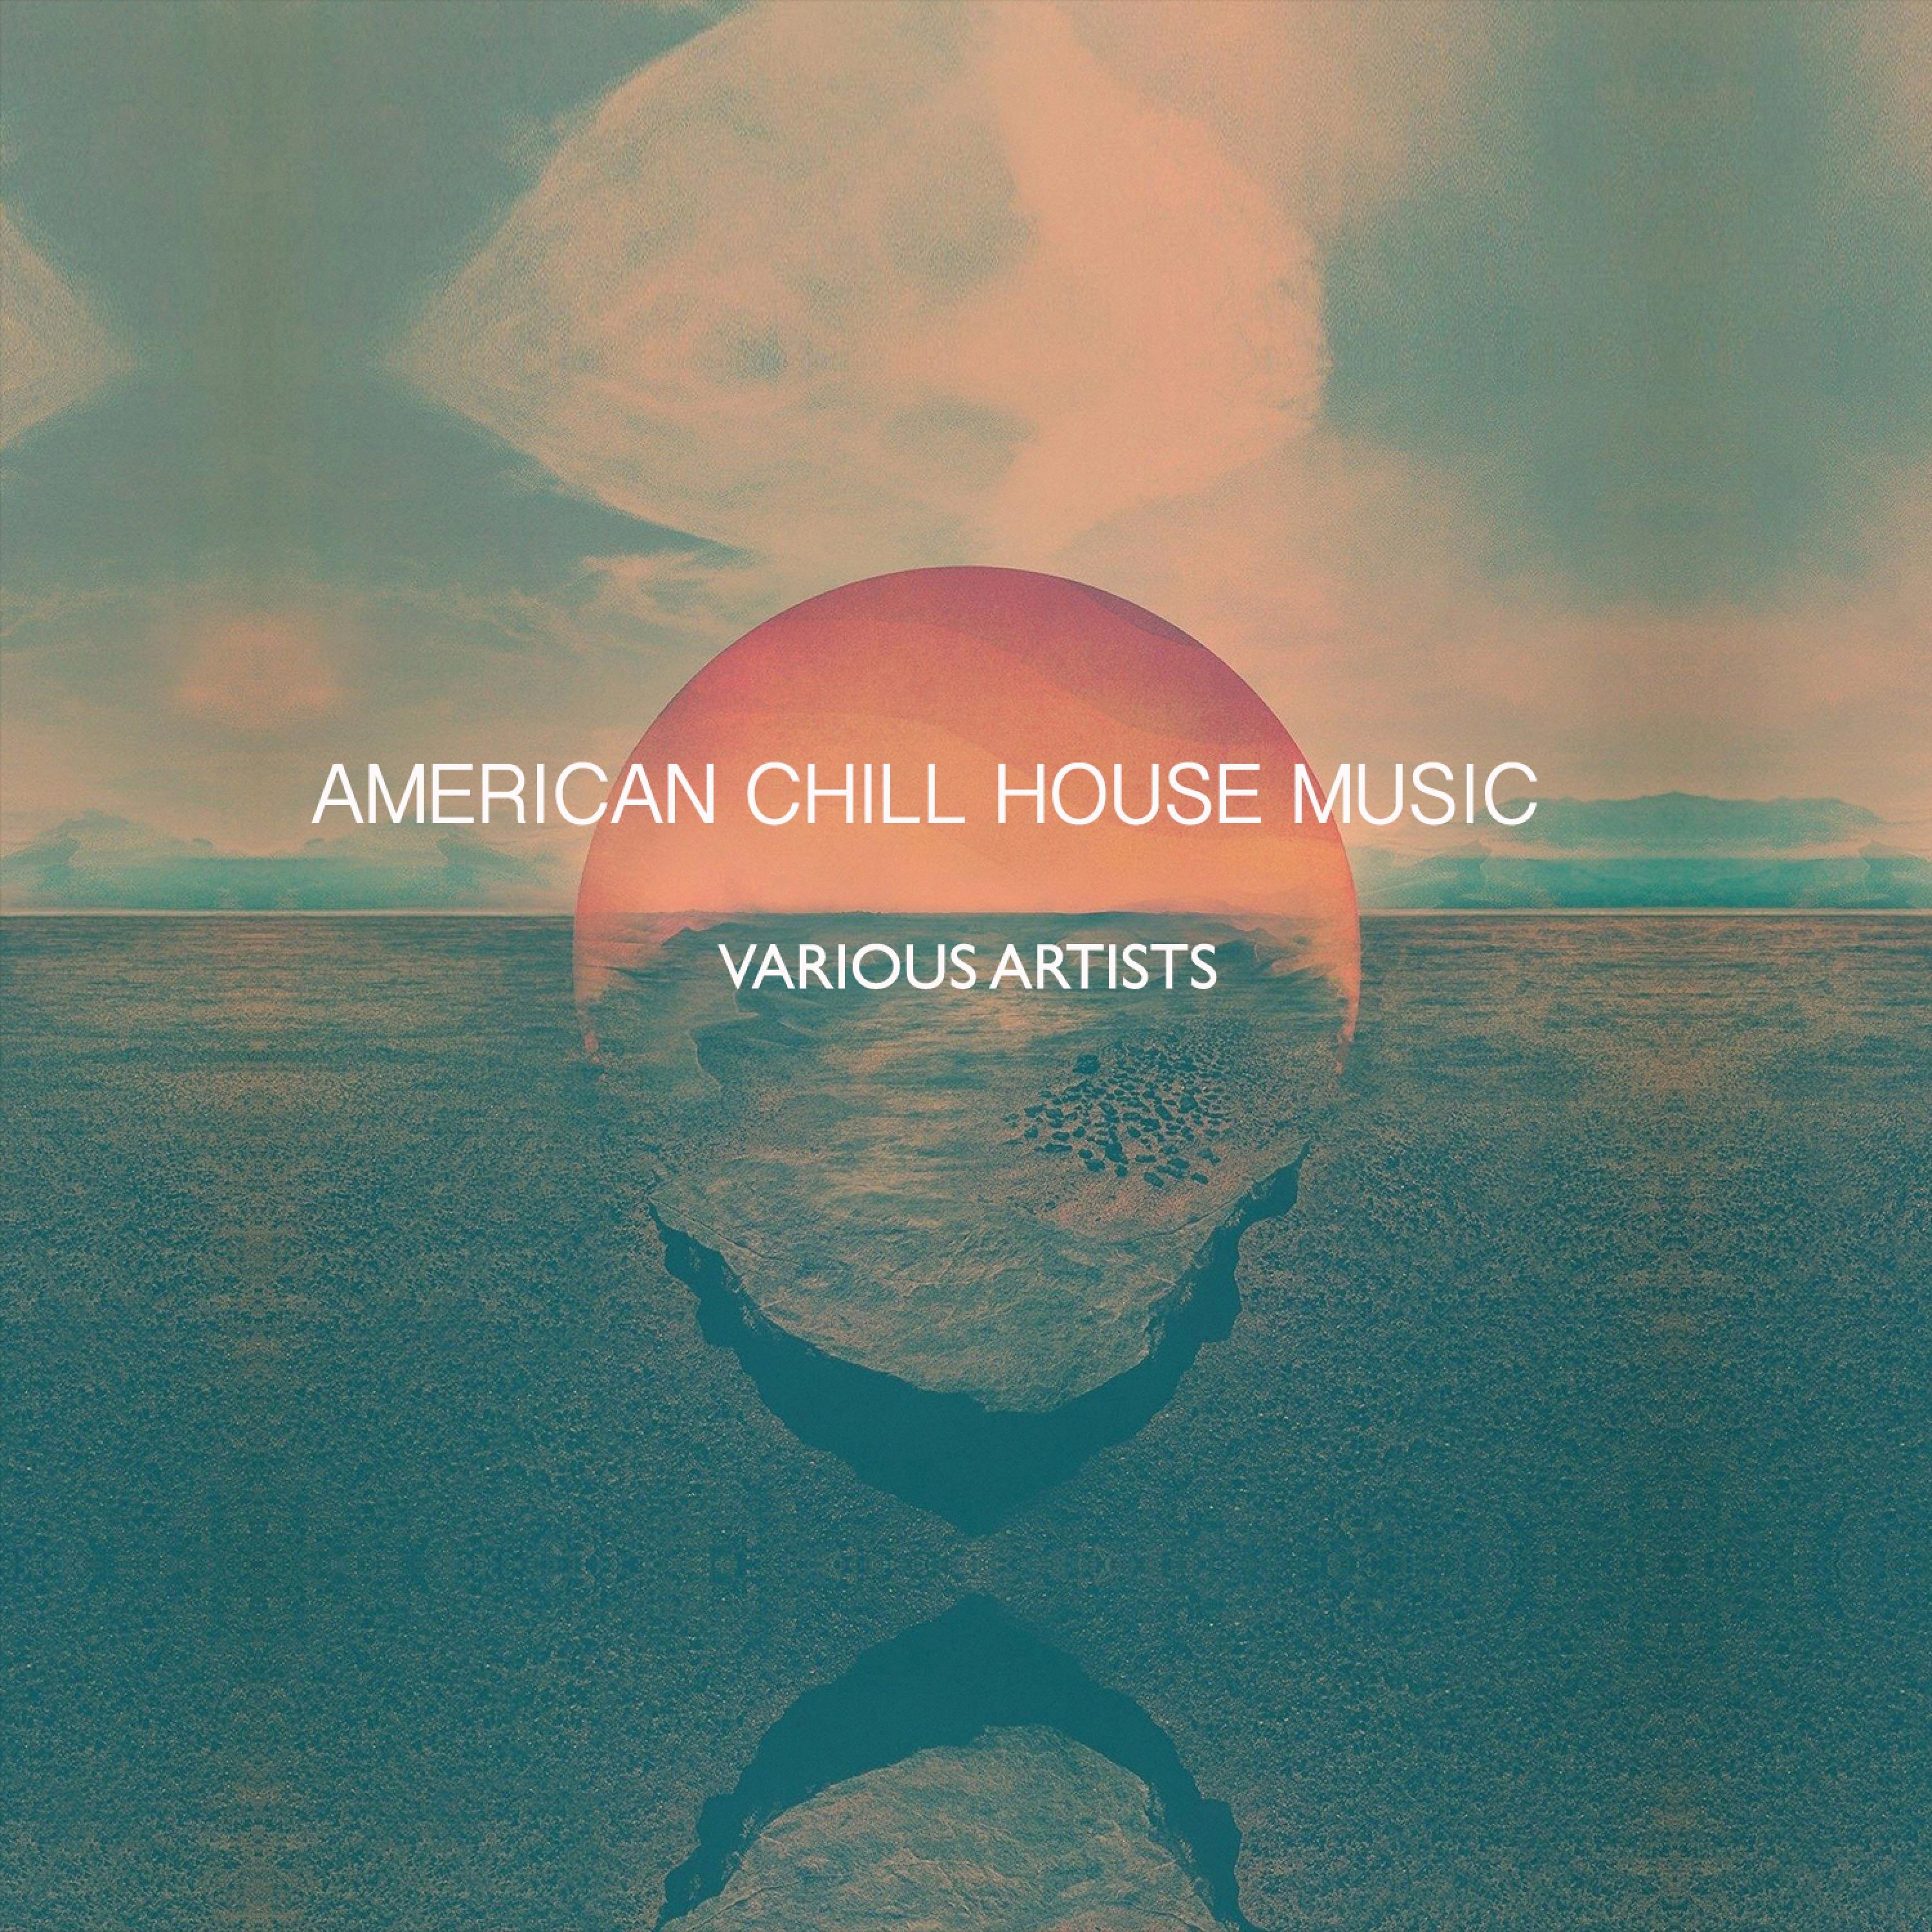 American Chill House Music